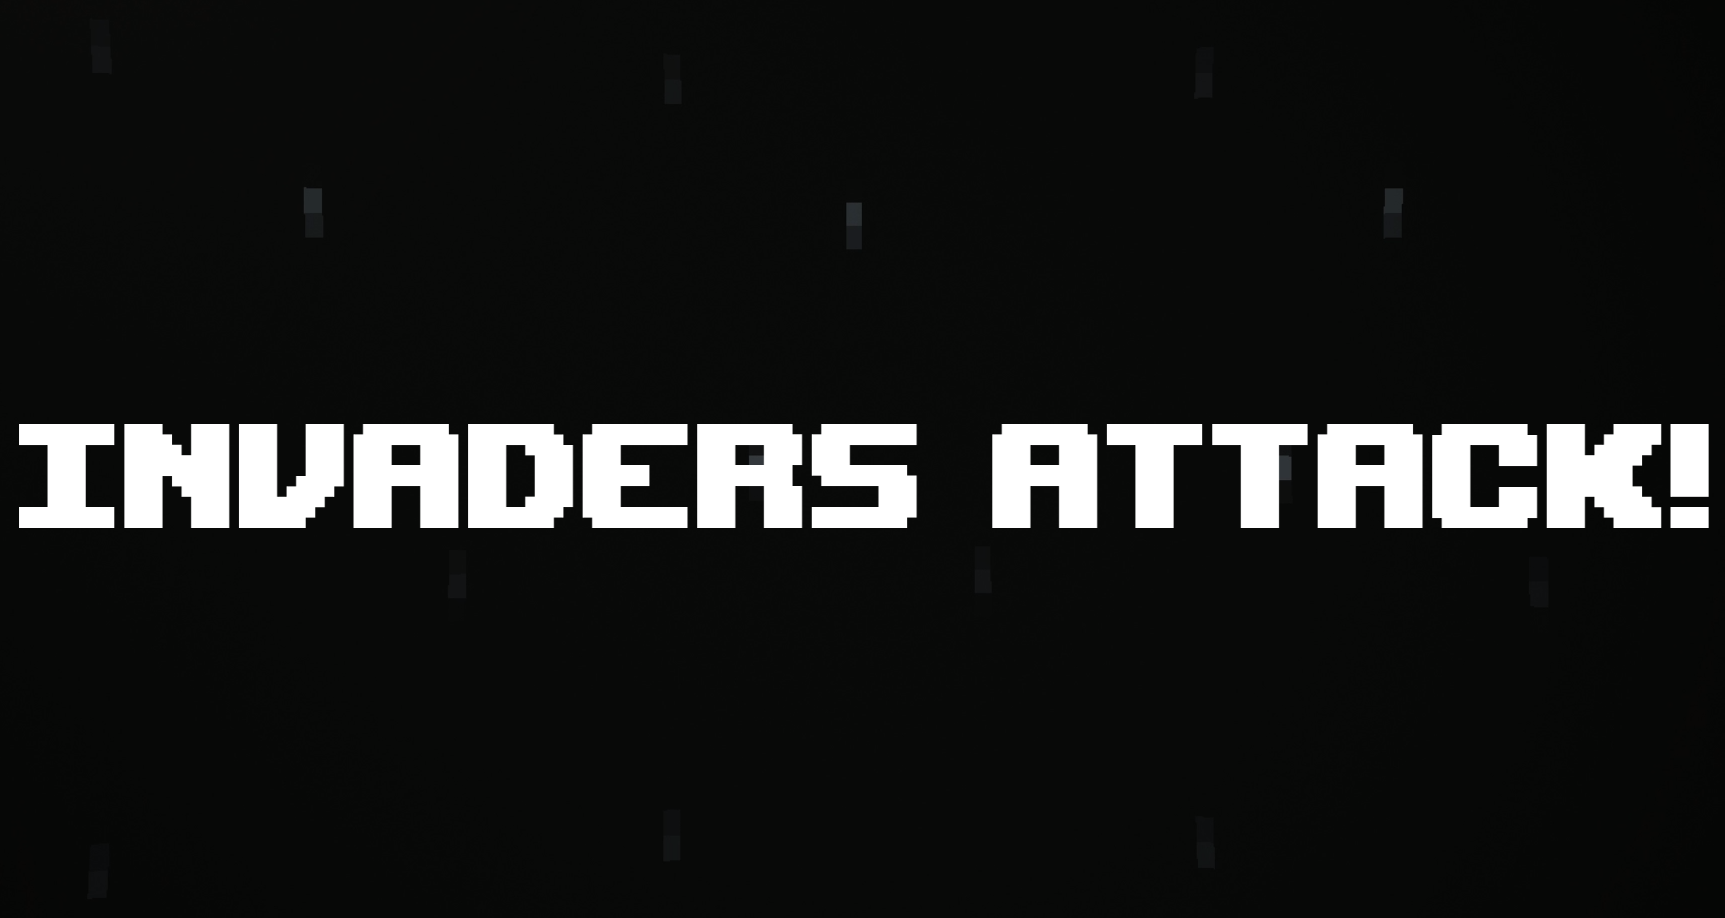 INVADERS ATTACK!